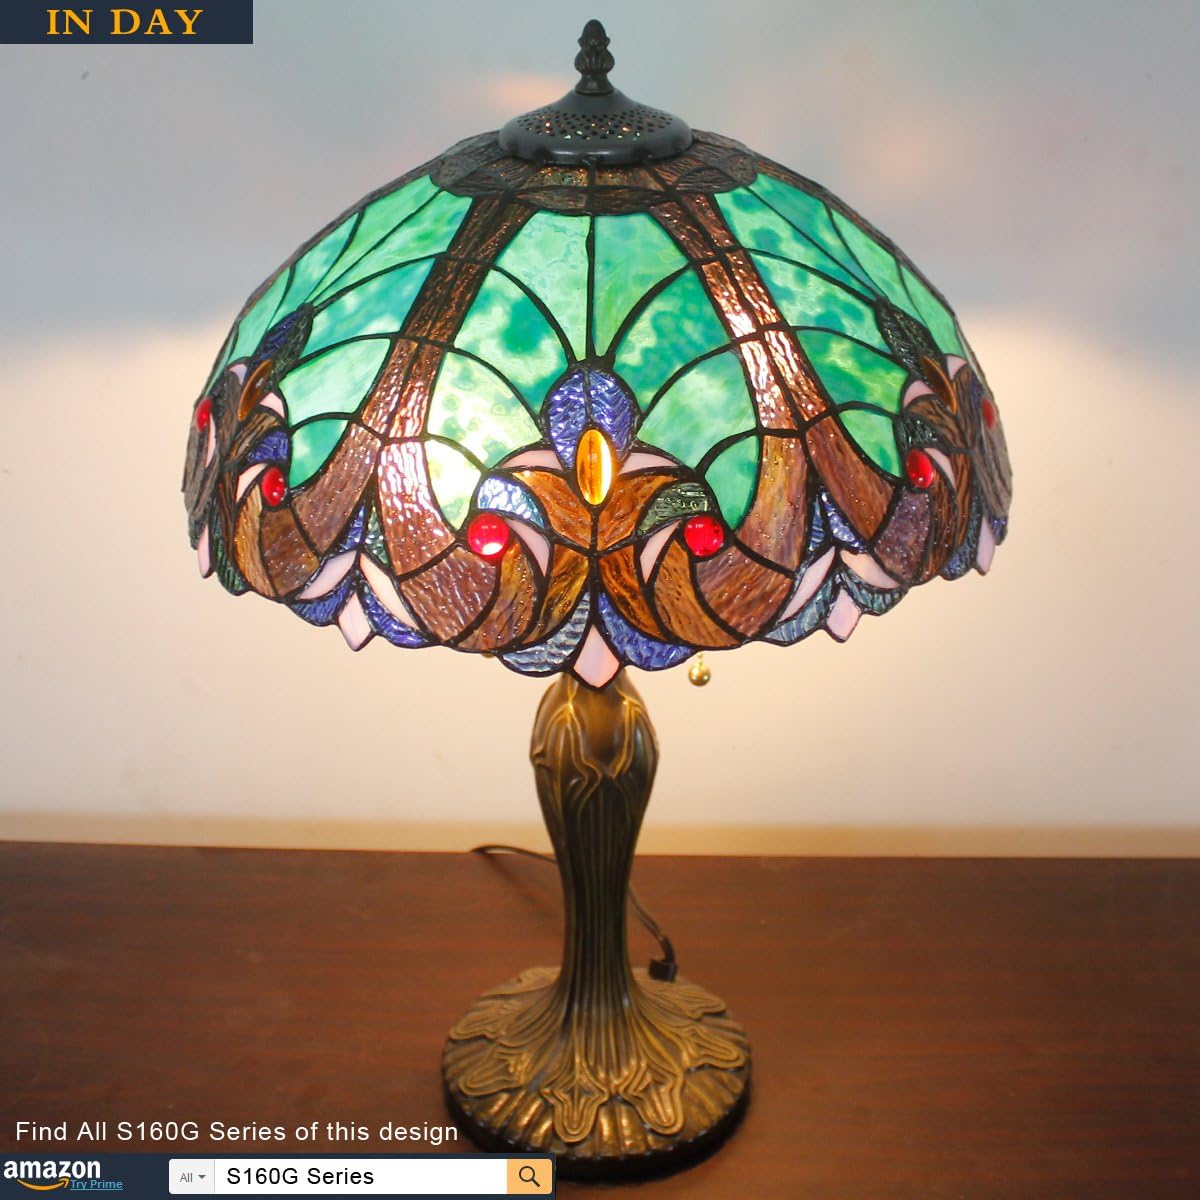 GEDUBIUBOO  Style Lamp Green Liaison Stained Glass Bedside Table Lamp 16X16X24 Inches Desk Light Metal Base Decor Bedroom Living Room  Office S160G Series Teal Purple